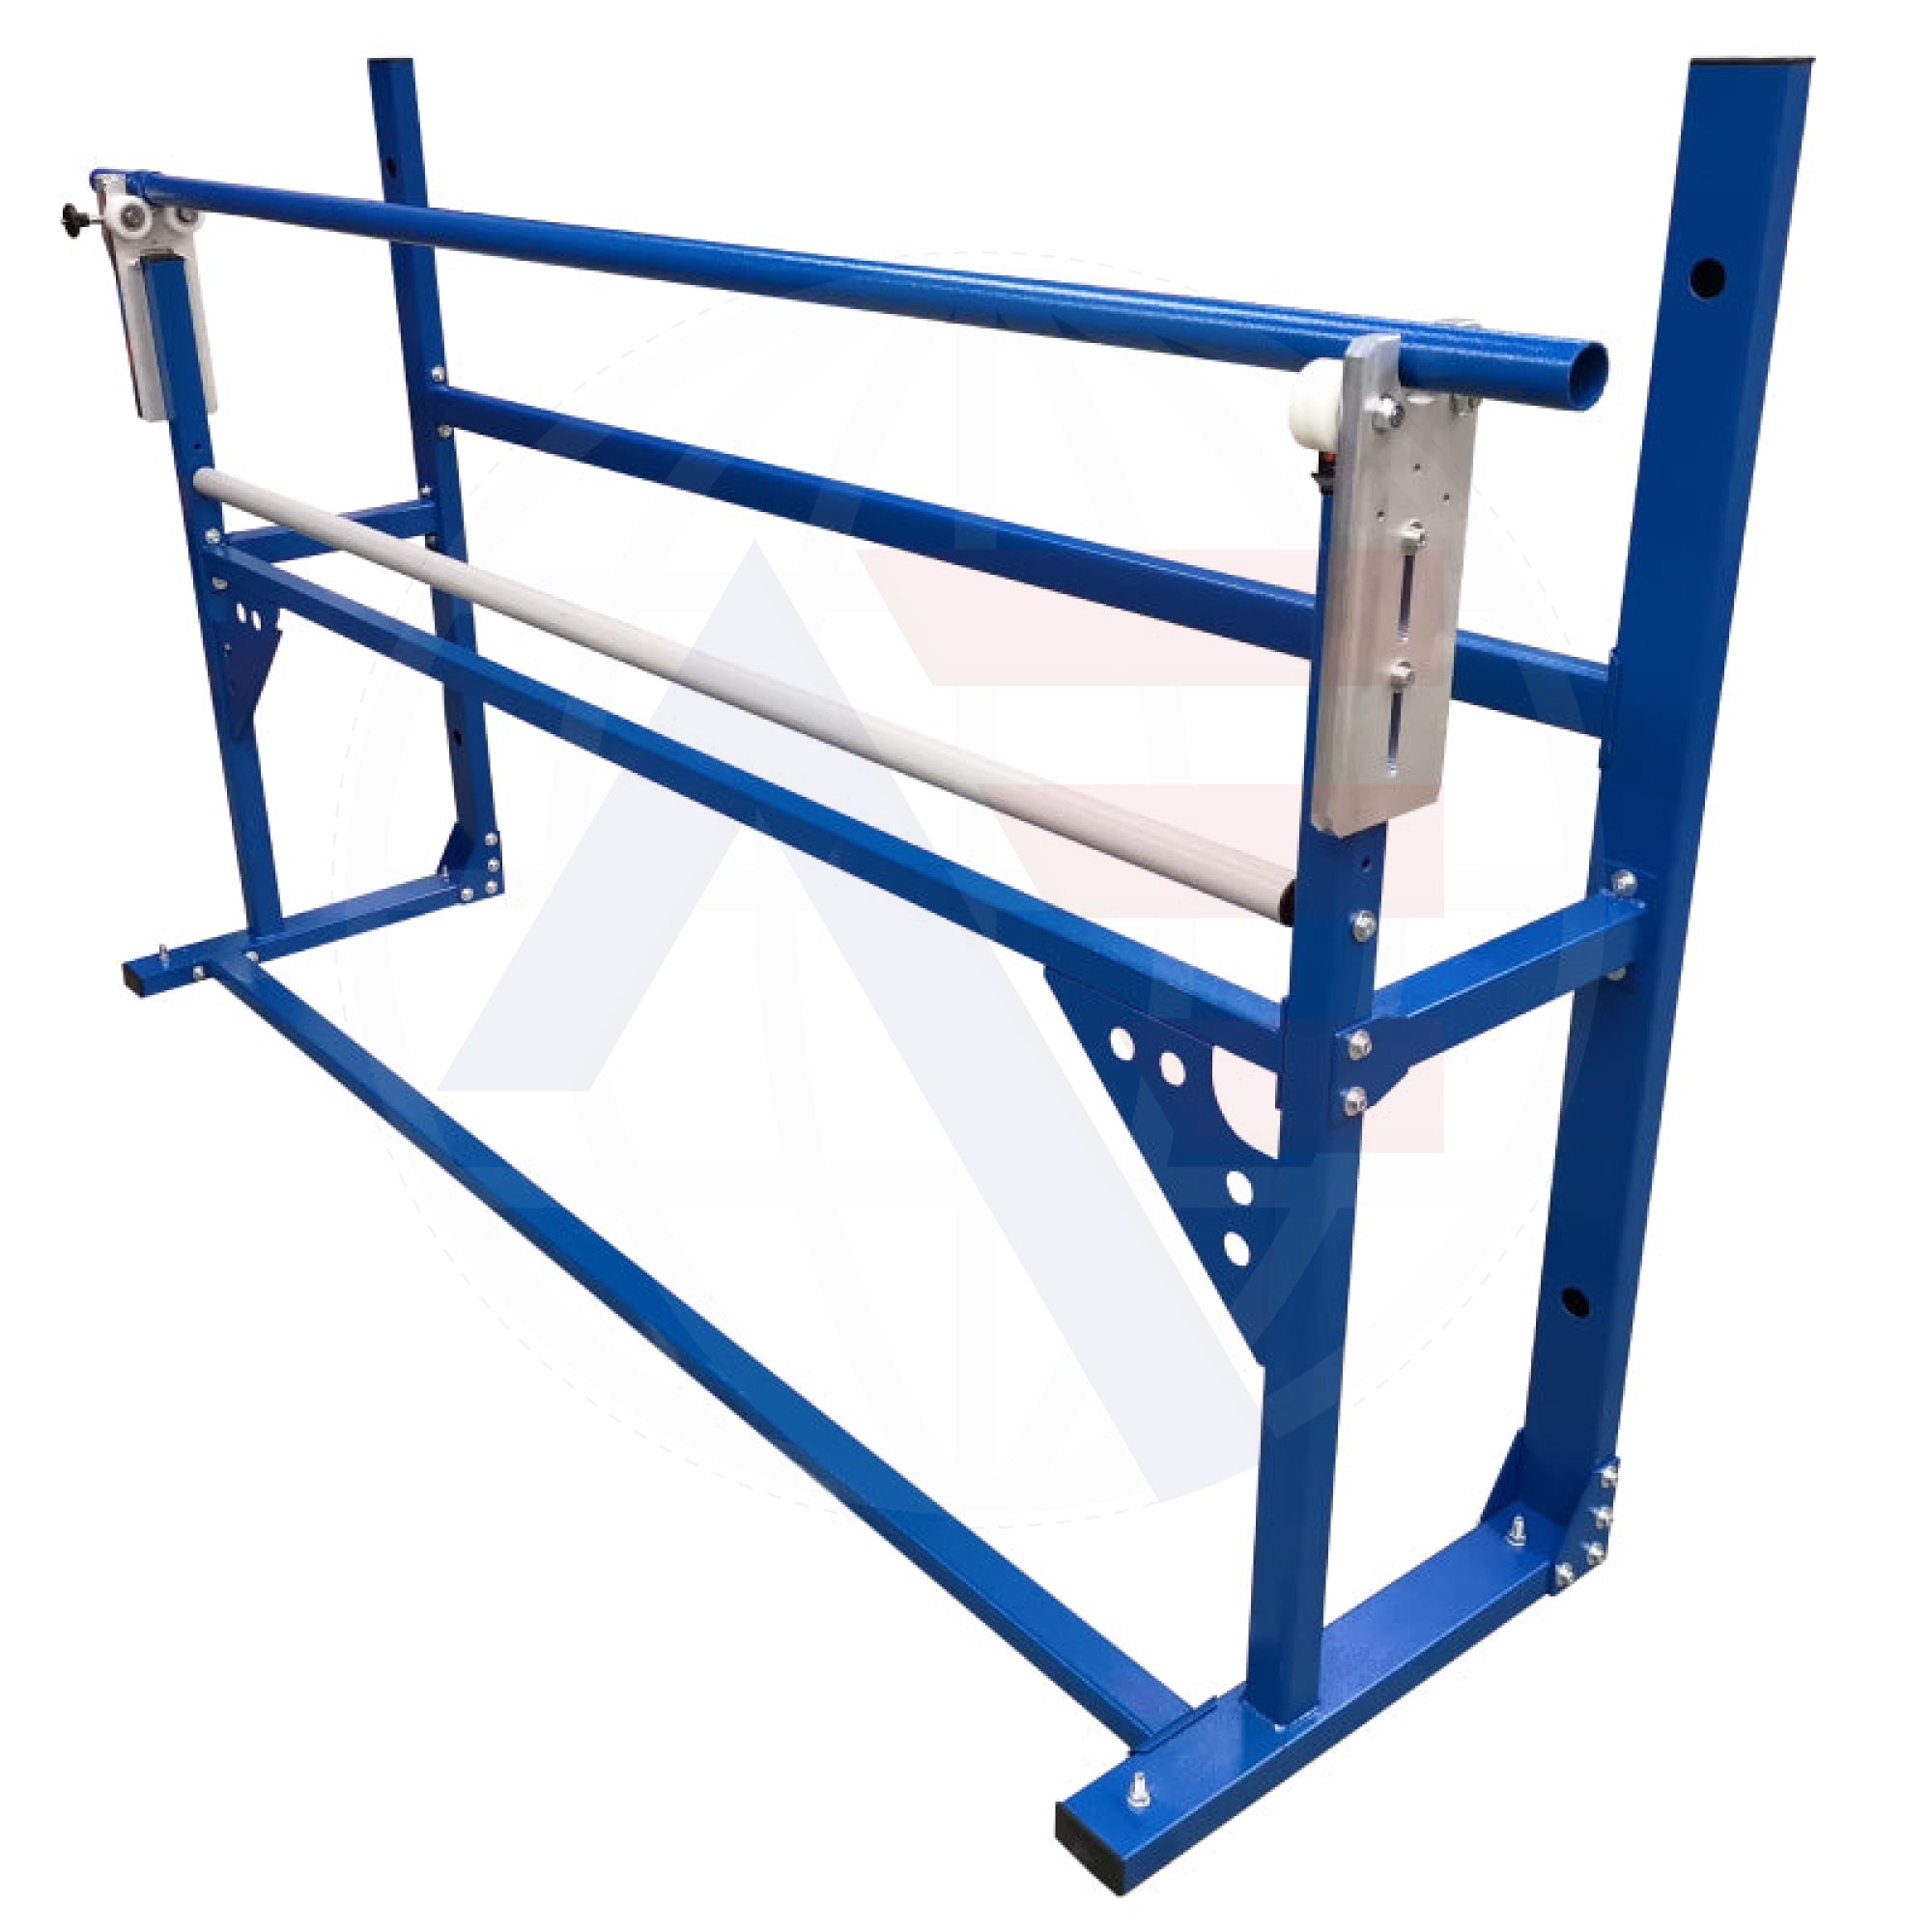 Rexel Ls-1/pc Roll Rack (Wall-Mounted) Material Handling